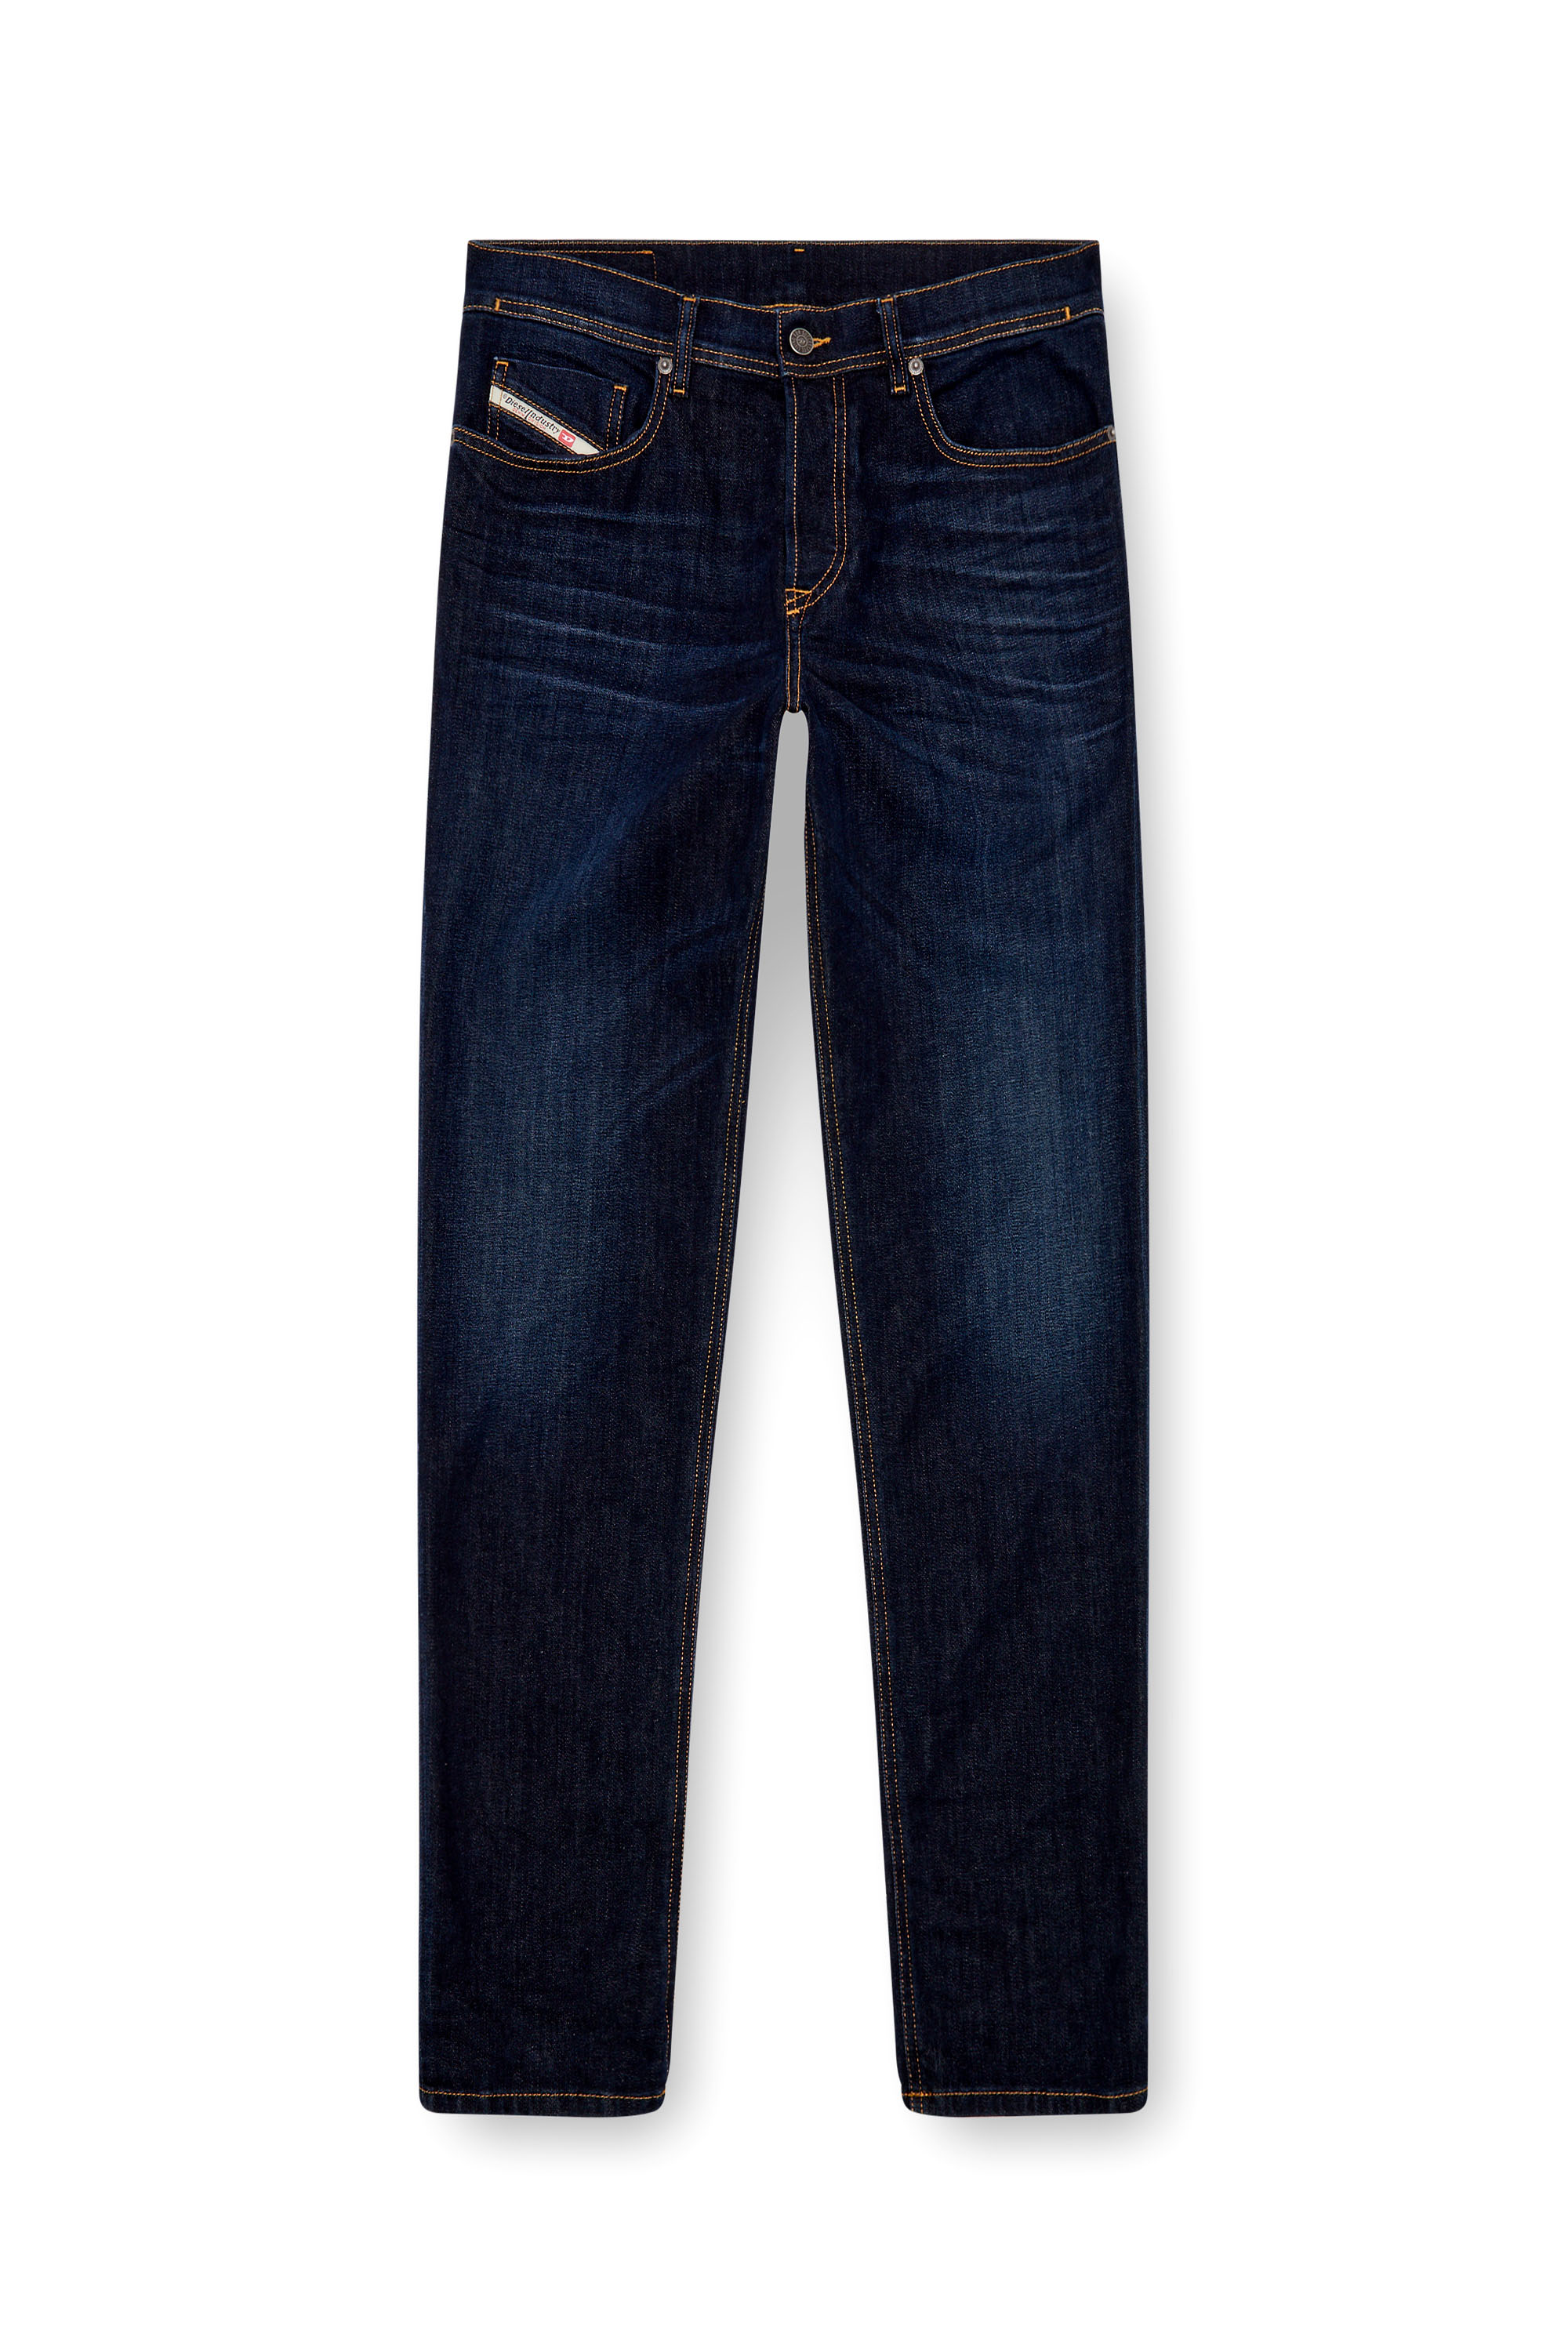 Diesel - Tapered Jeans 2023 D-Finitive 009ZS, Hombre Tapered Jeans - 2023 D-Finitive in Azul marino - Image 5